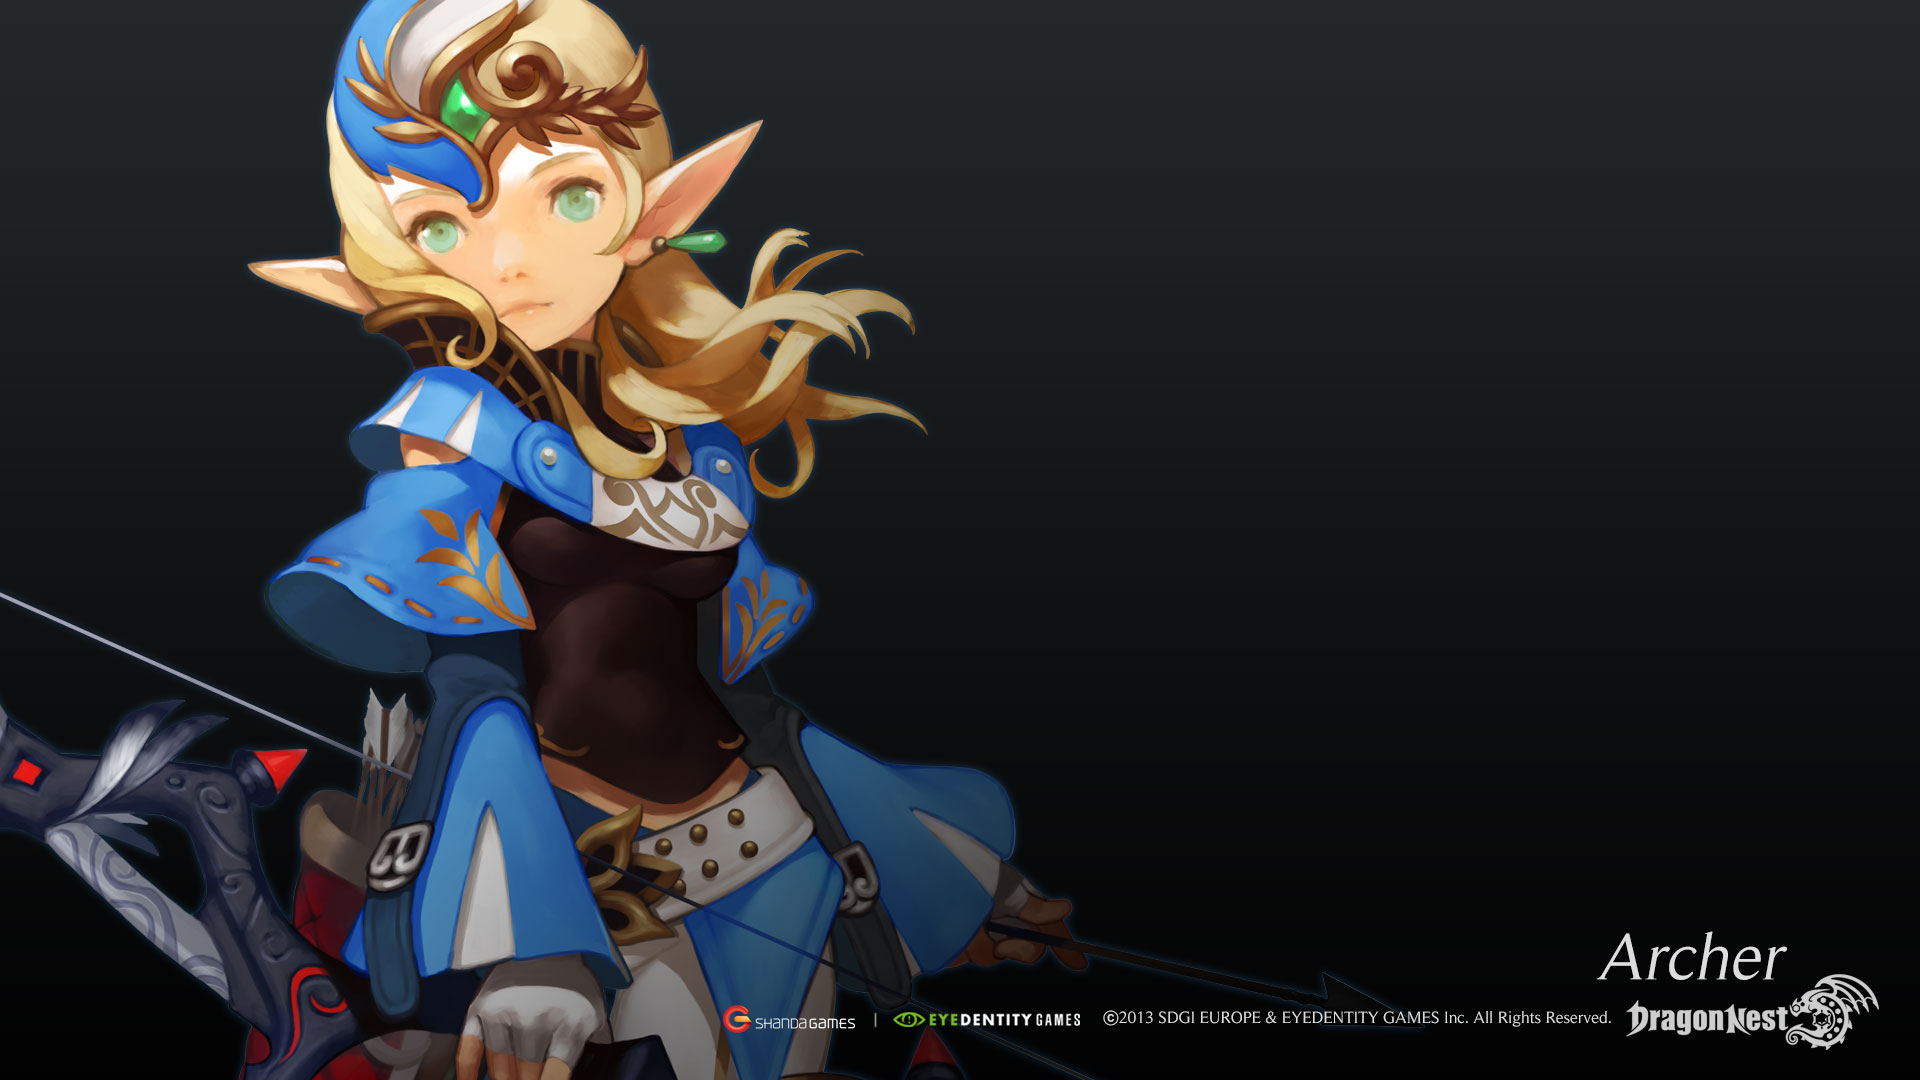 HD Wallpaper Dragon Nest Europe To Play Online